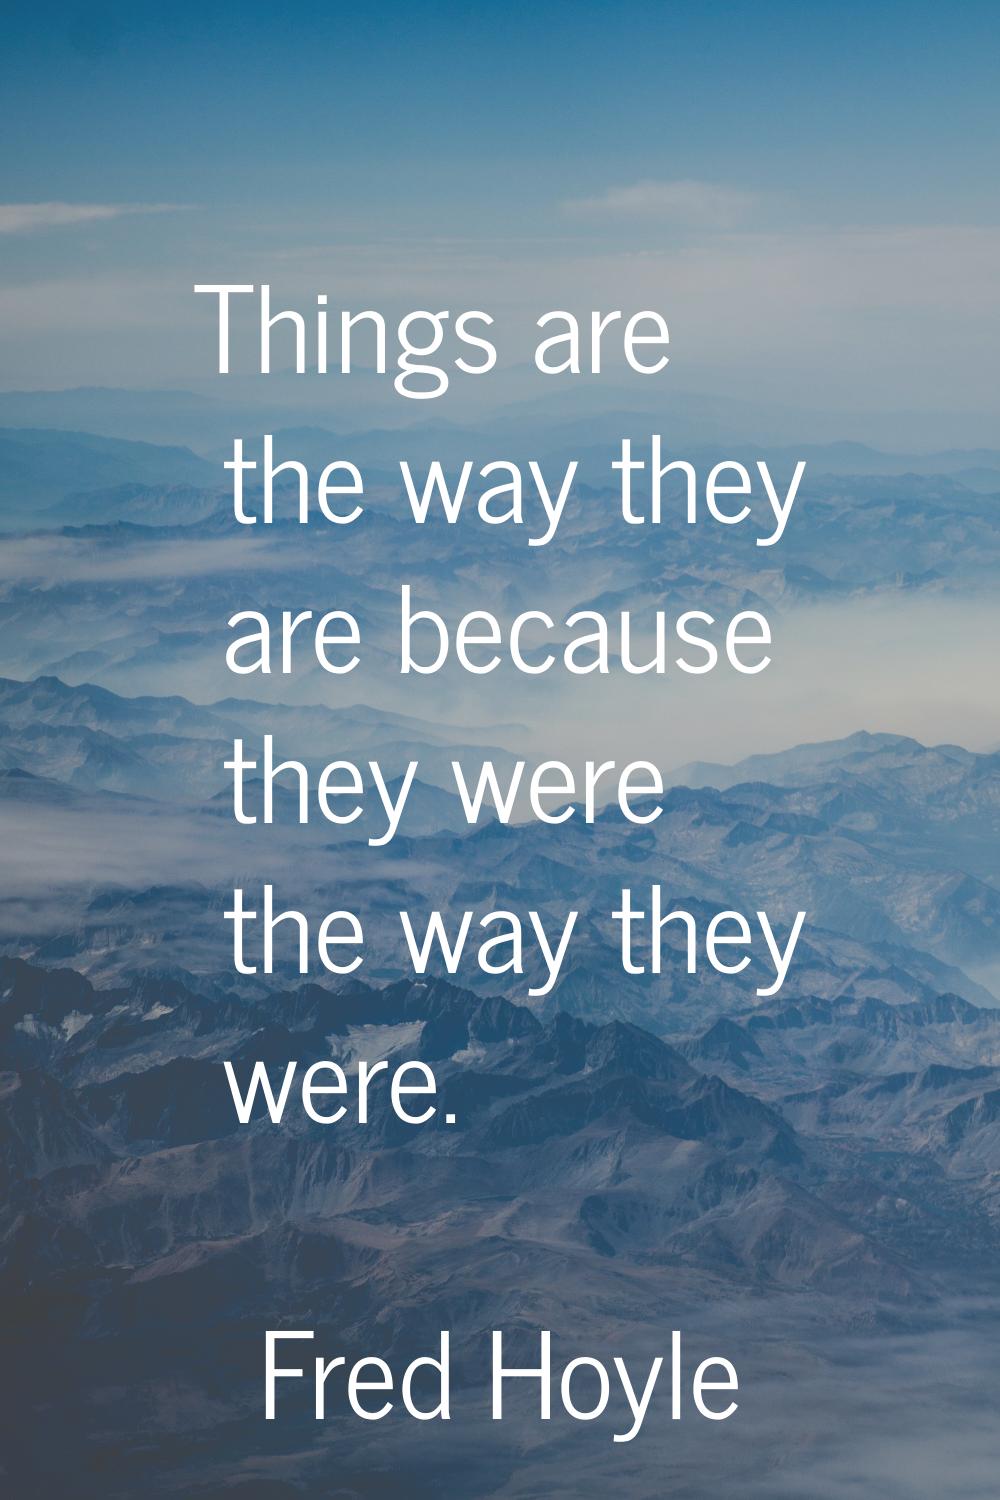 Things are the way they are because they were the way they were.